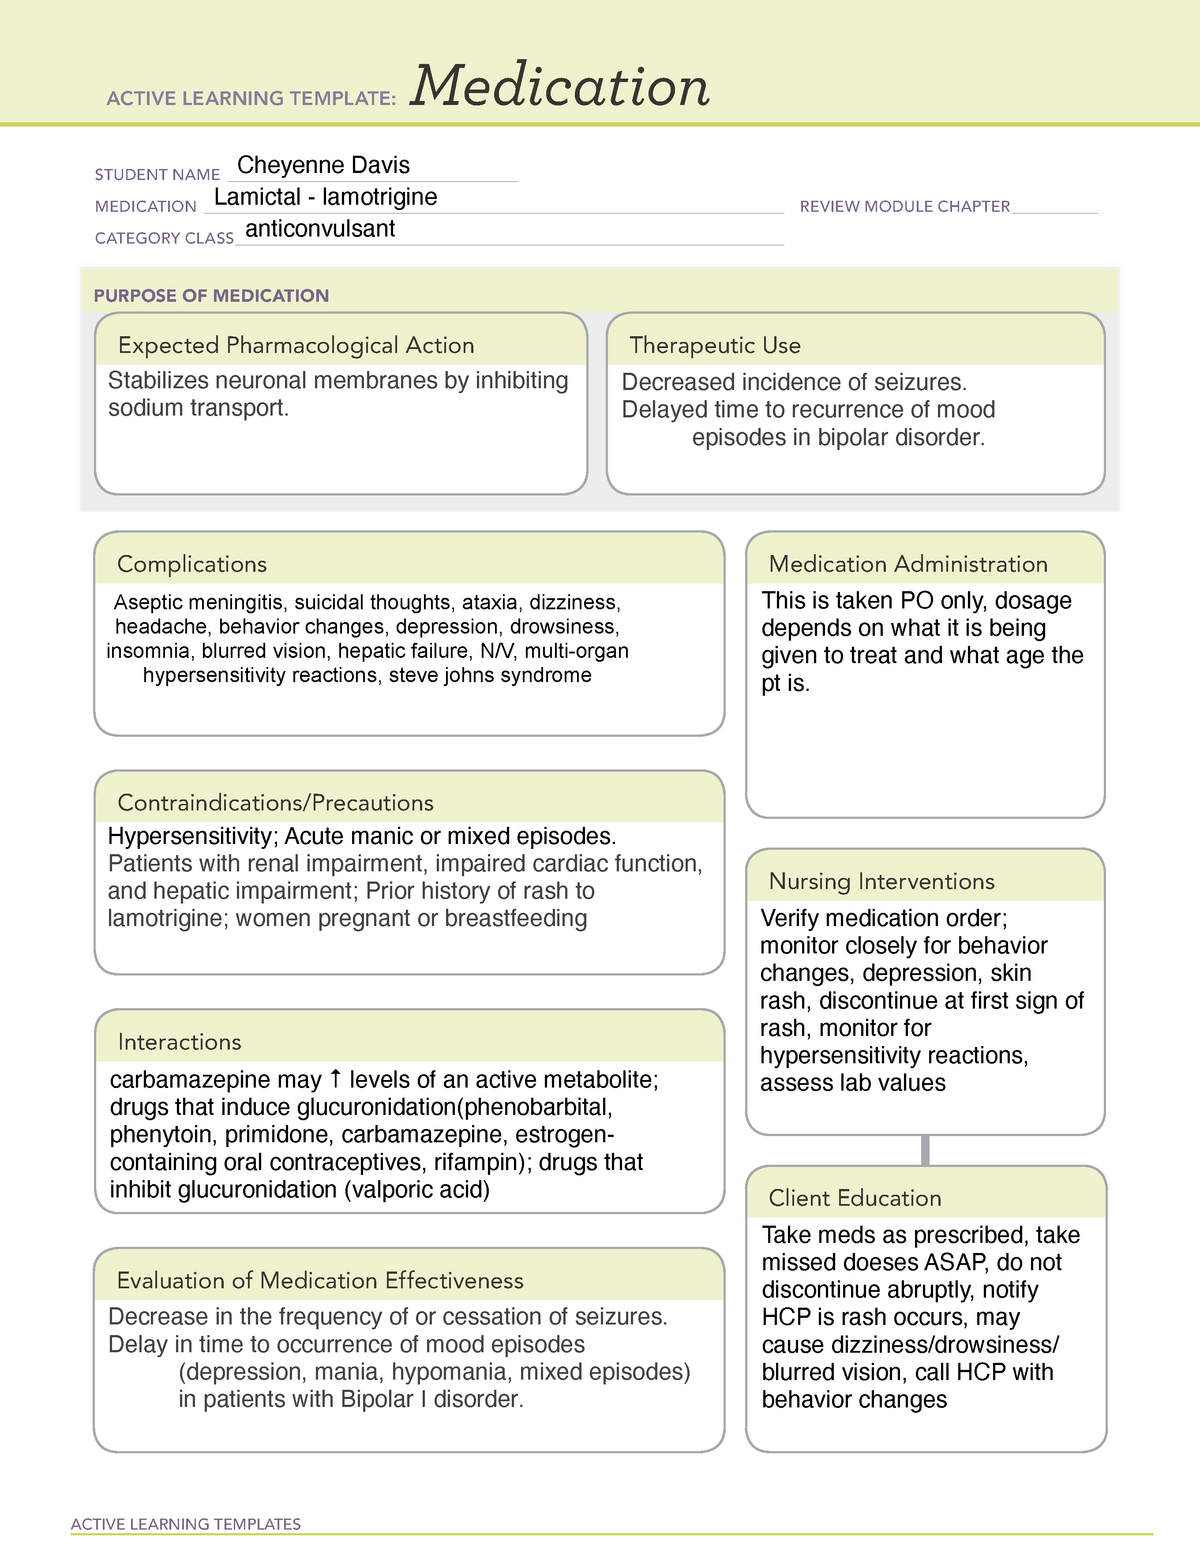 active-learning-template-for-lamictal-med-active-learning-templates-medication-student-name